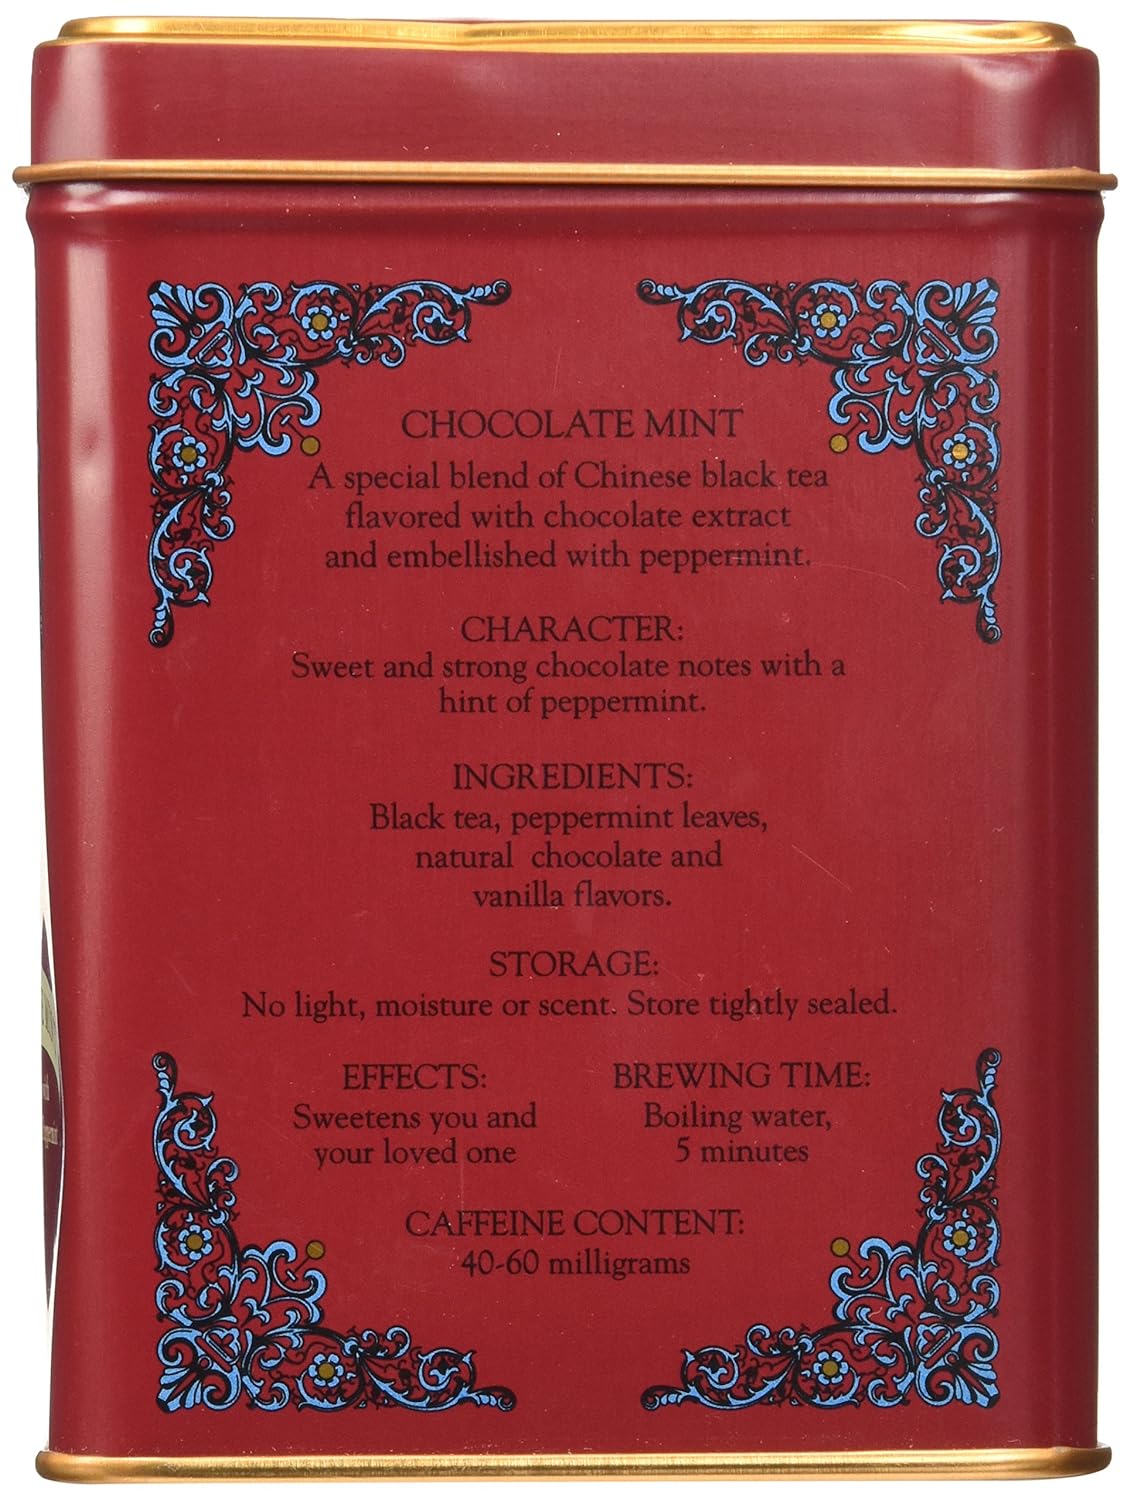 Wholesale prices with free shipping all over United States Harney & Sons Hot Cinnamon Spice Tea Tin - Black Tea with Orange & Sweet Clove - 2.67 Ounces, 30 Sachets - Steven Deals